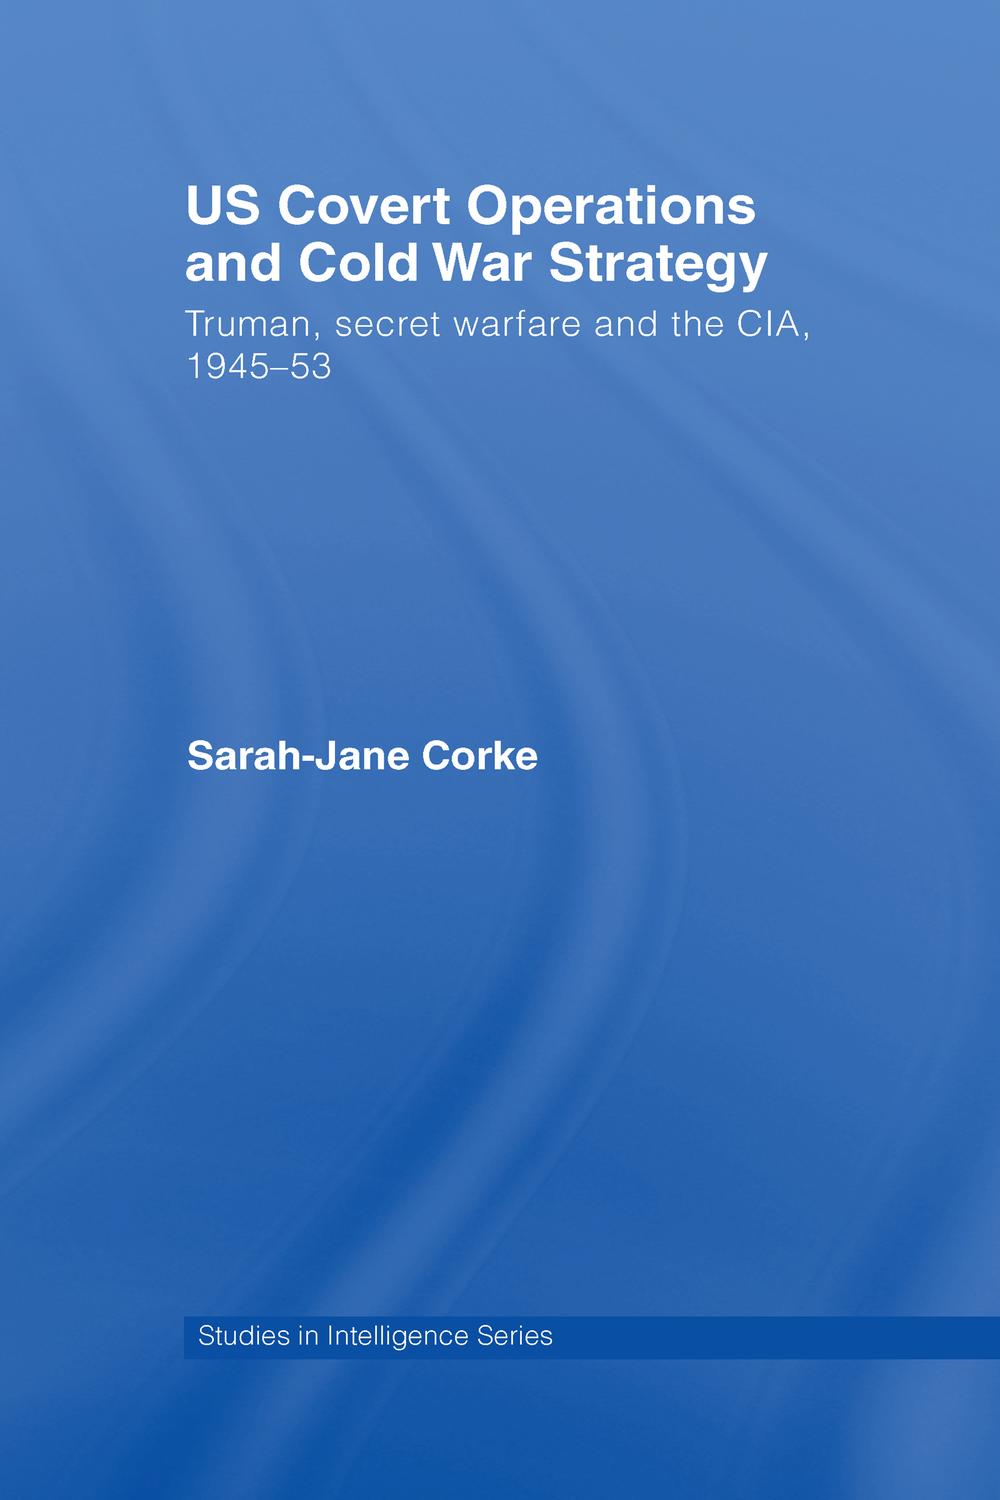 US Covert Operations and Cold War Strategy - Sarah-Jane Corke